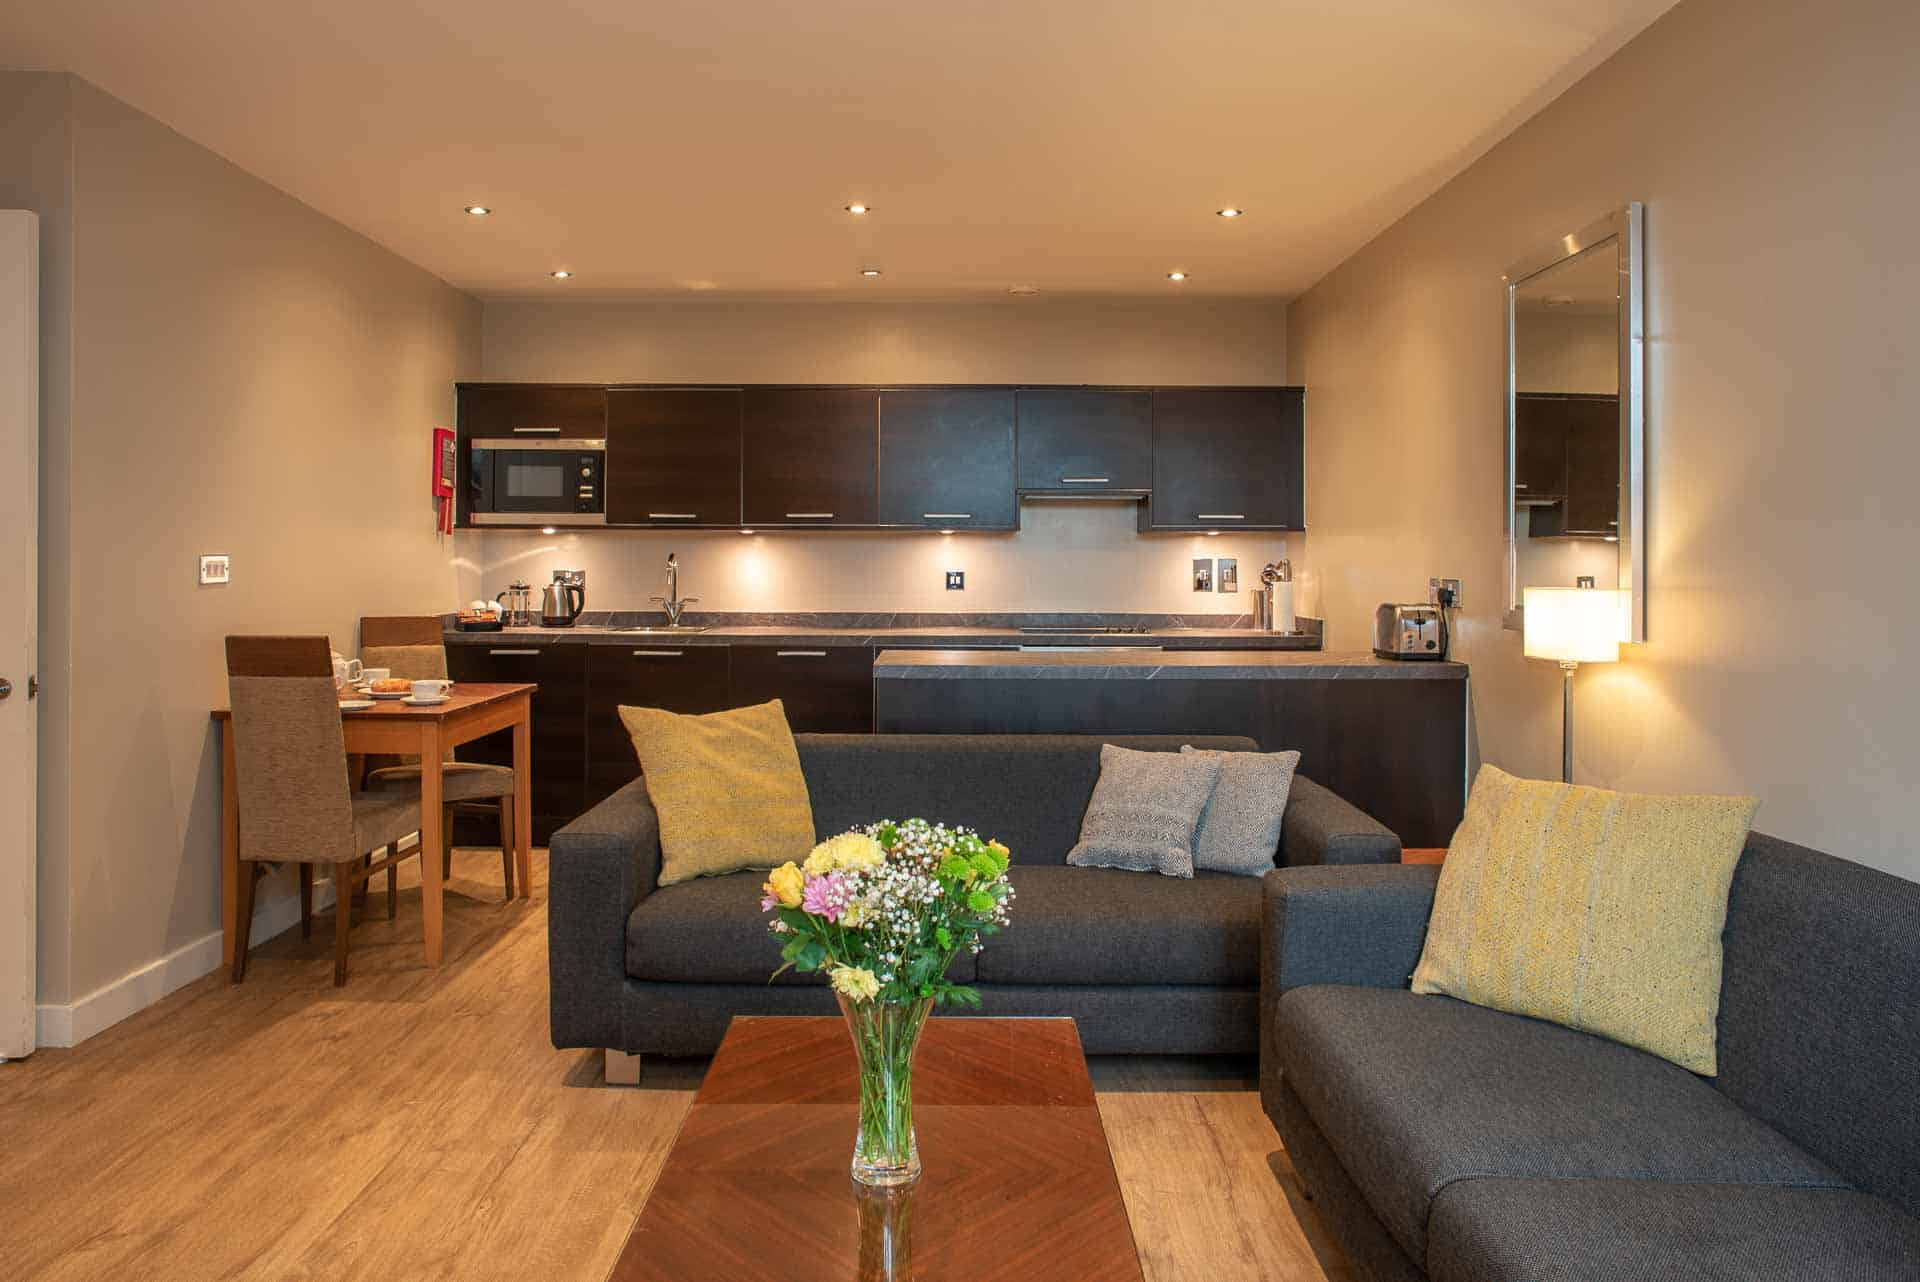 Quarantine in comfort with PREMIER SUITES Manchester -Serviced